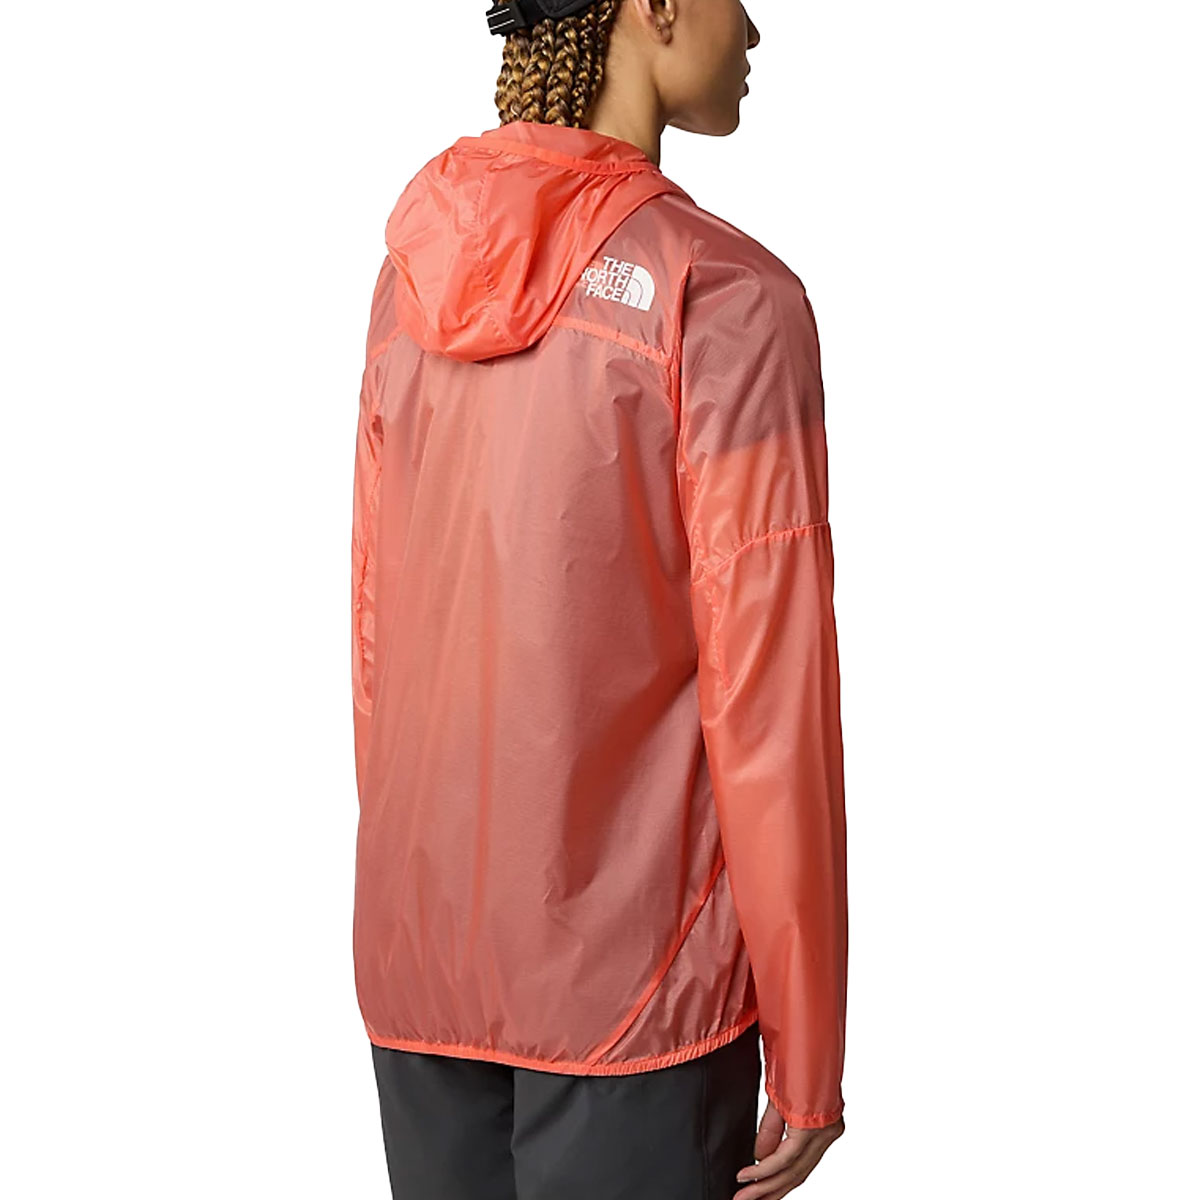 THE NORTH FACE - WINDSTREAM SHELL JACKET